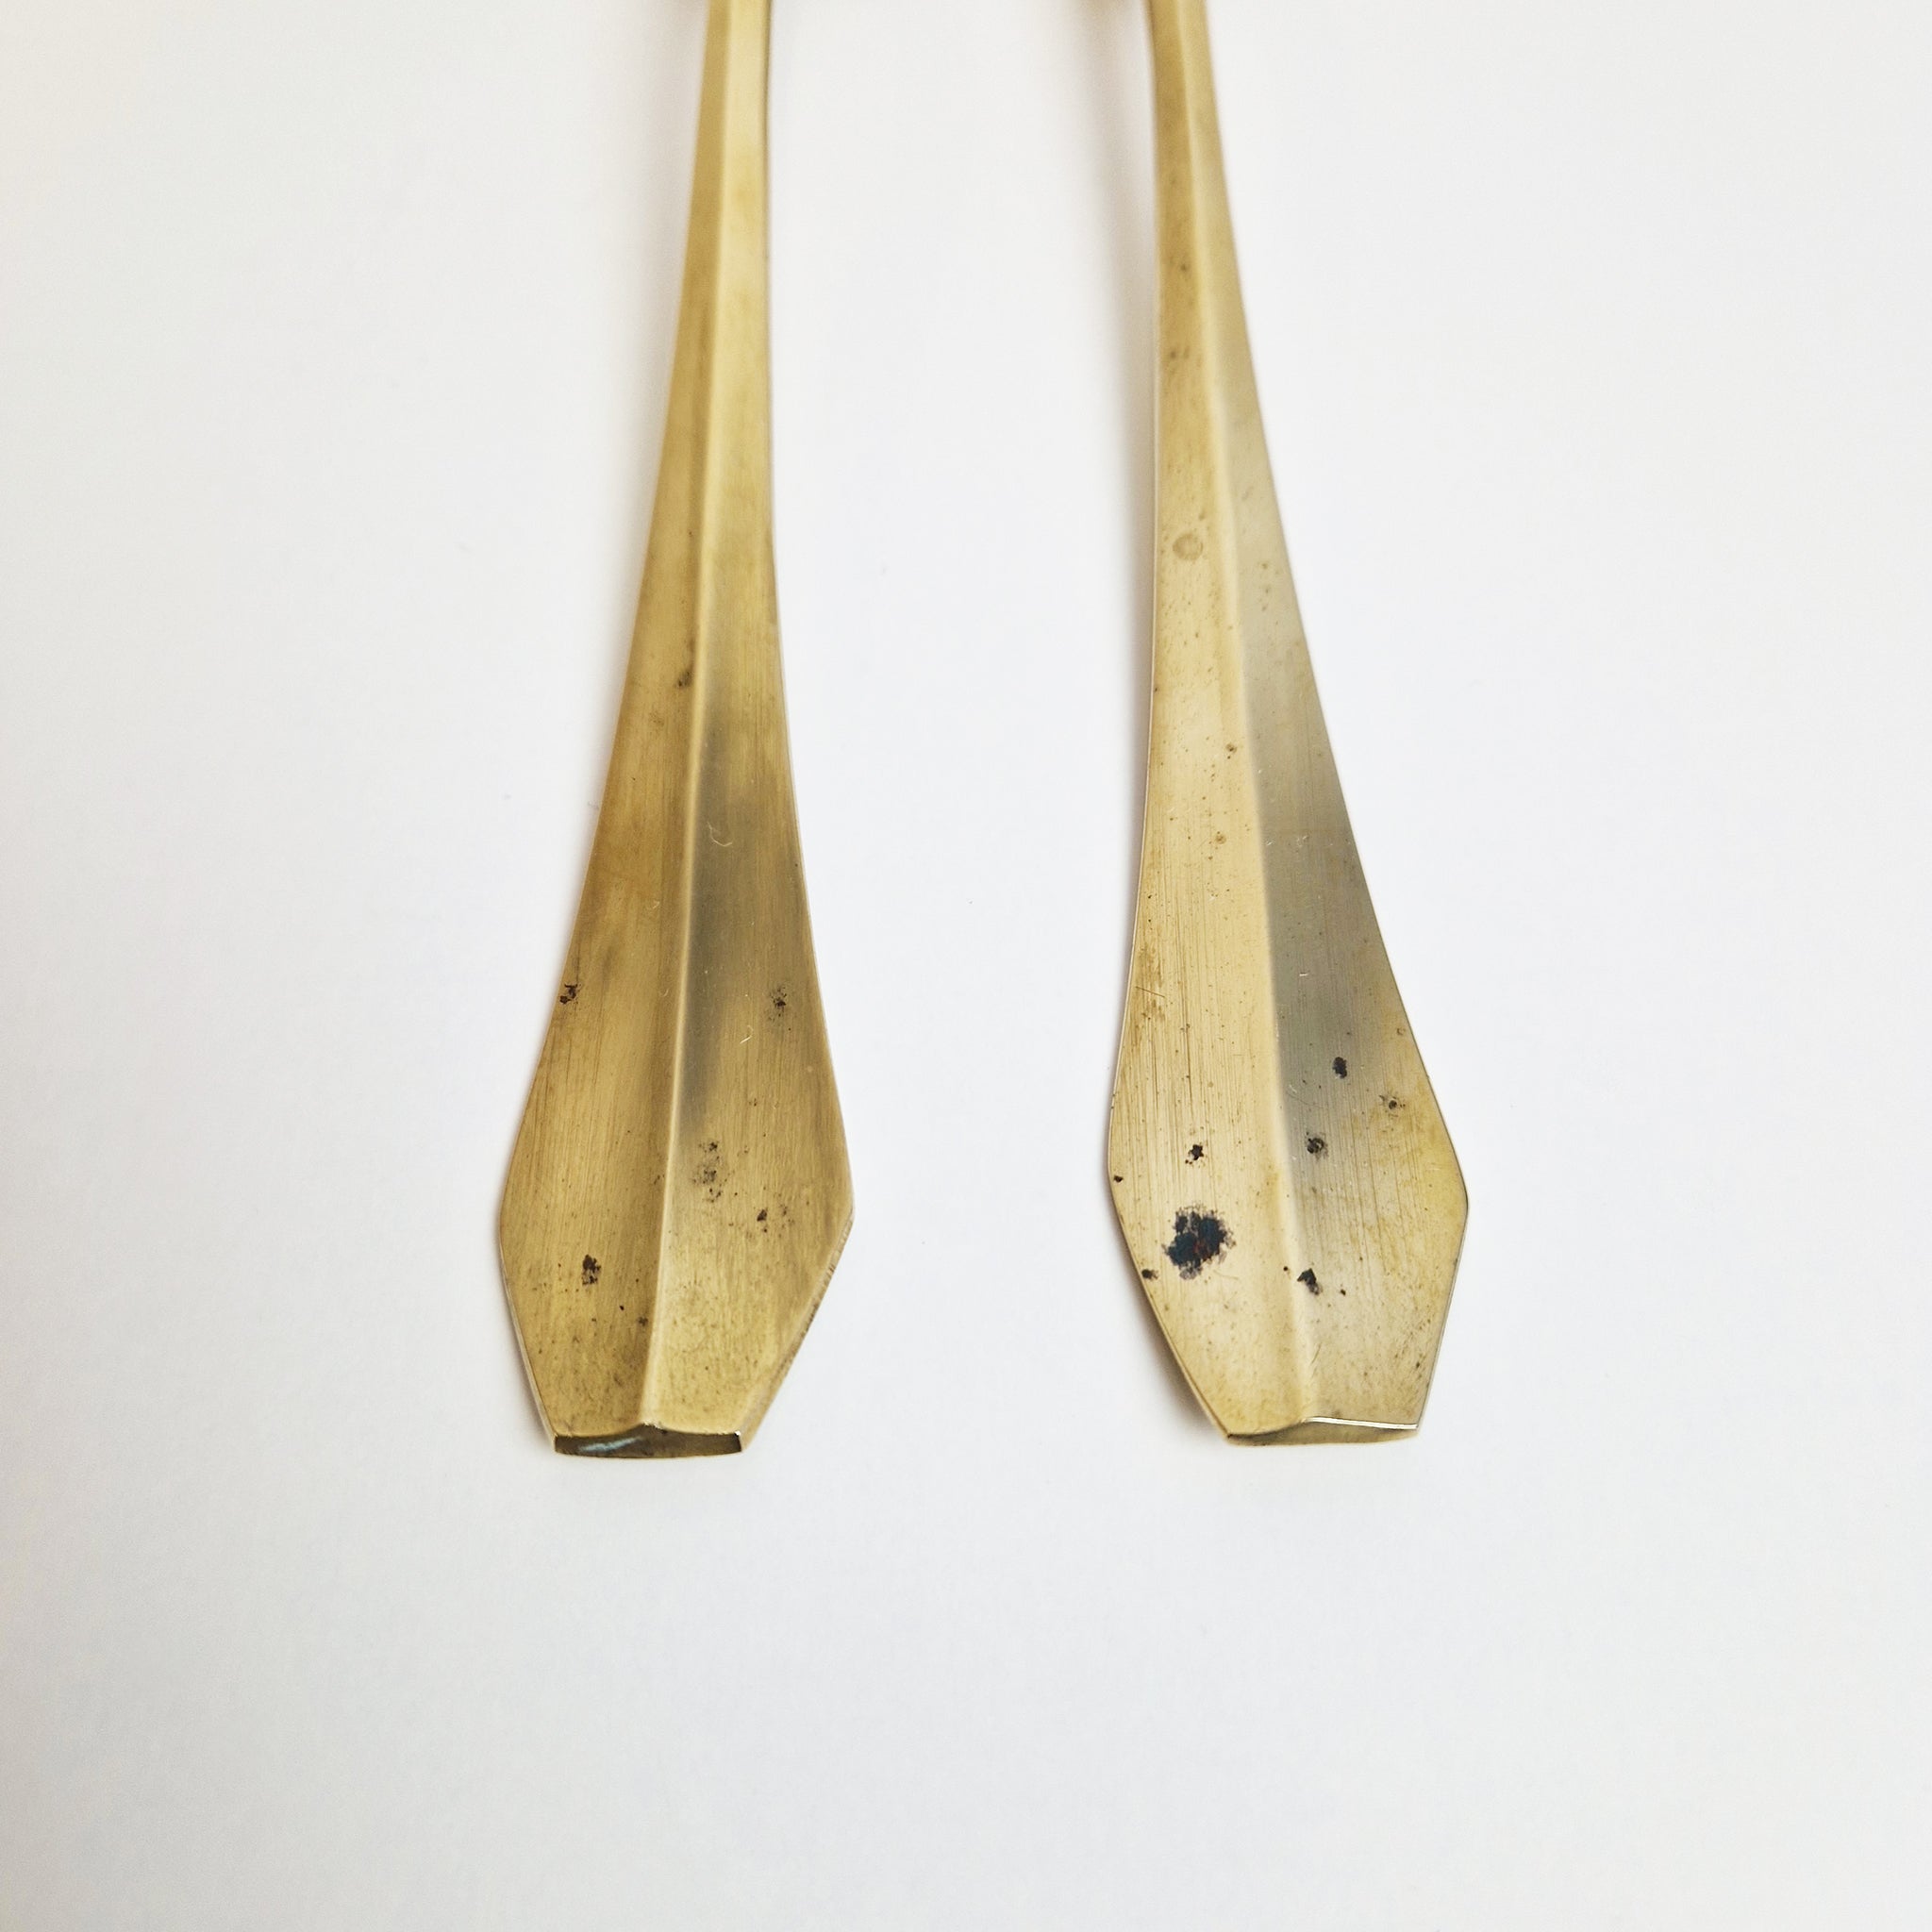 Vintage brass spoon and fork for serving